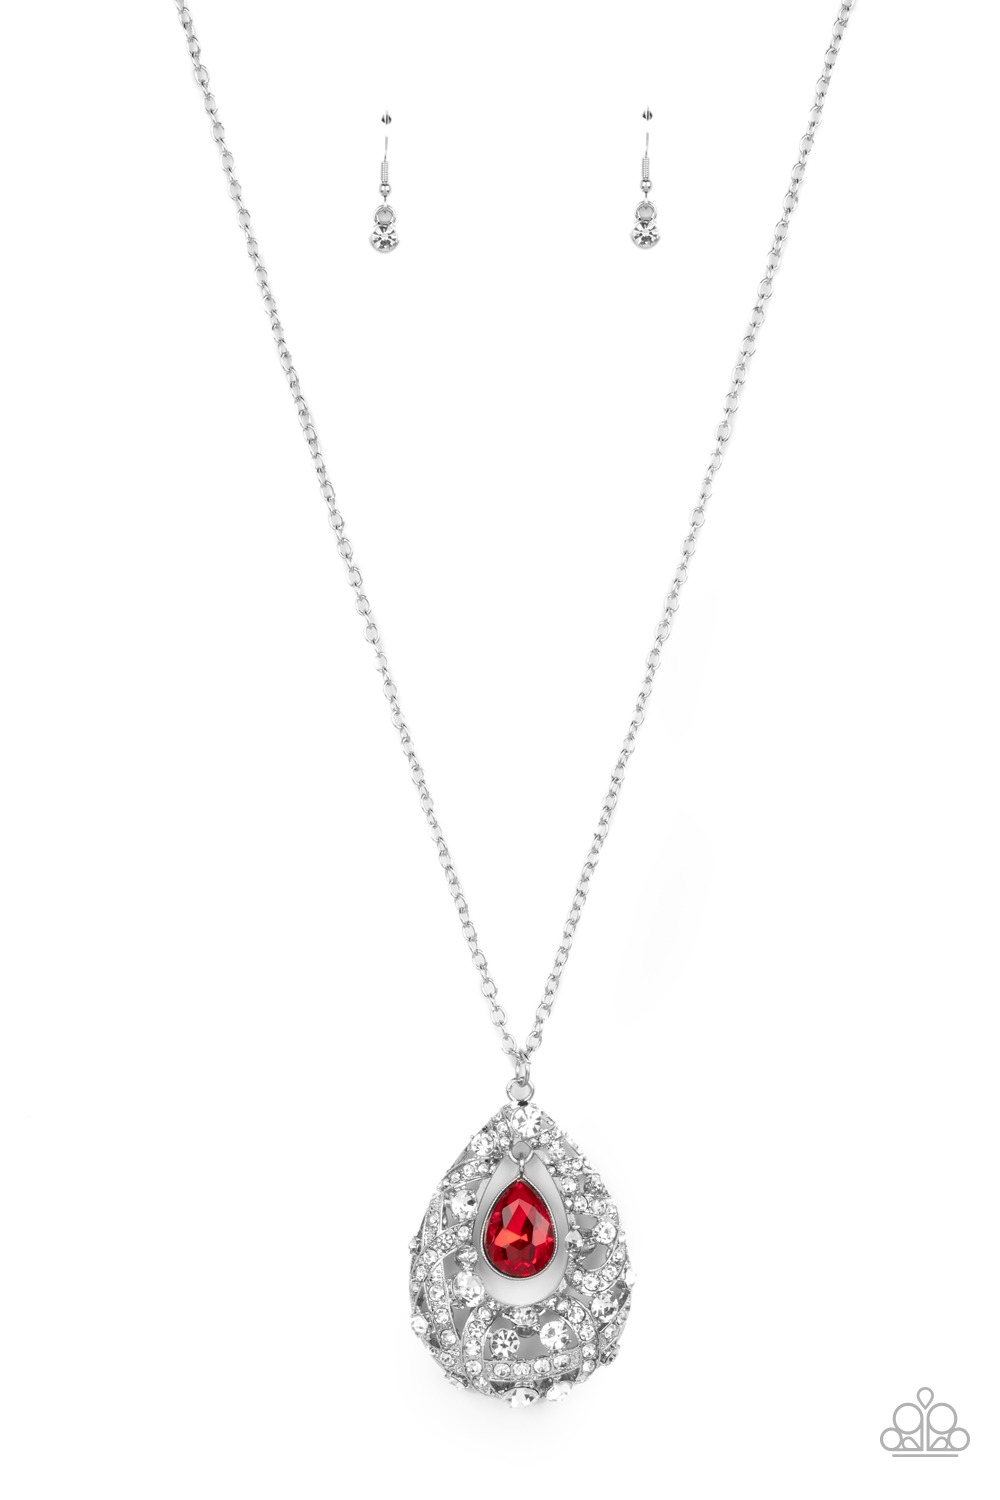 Necklace - Glitz and GLOW - Red